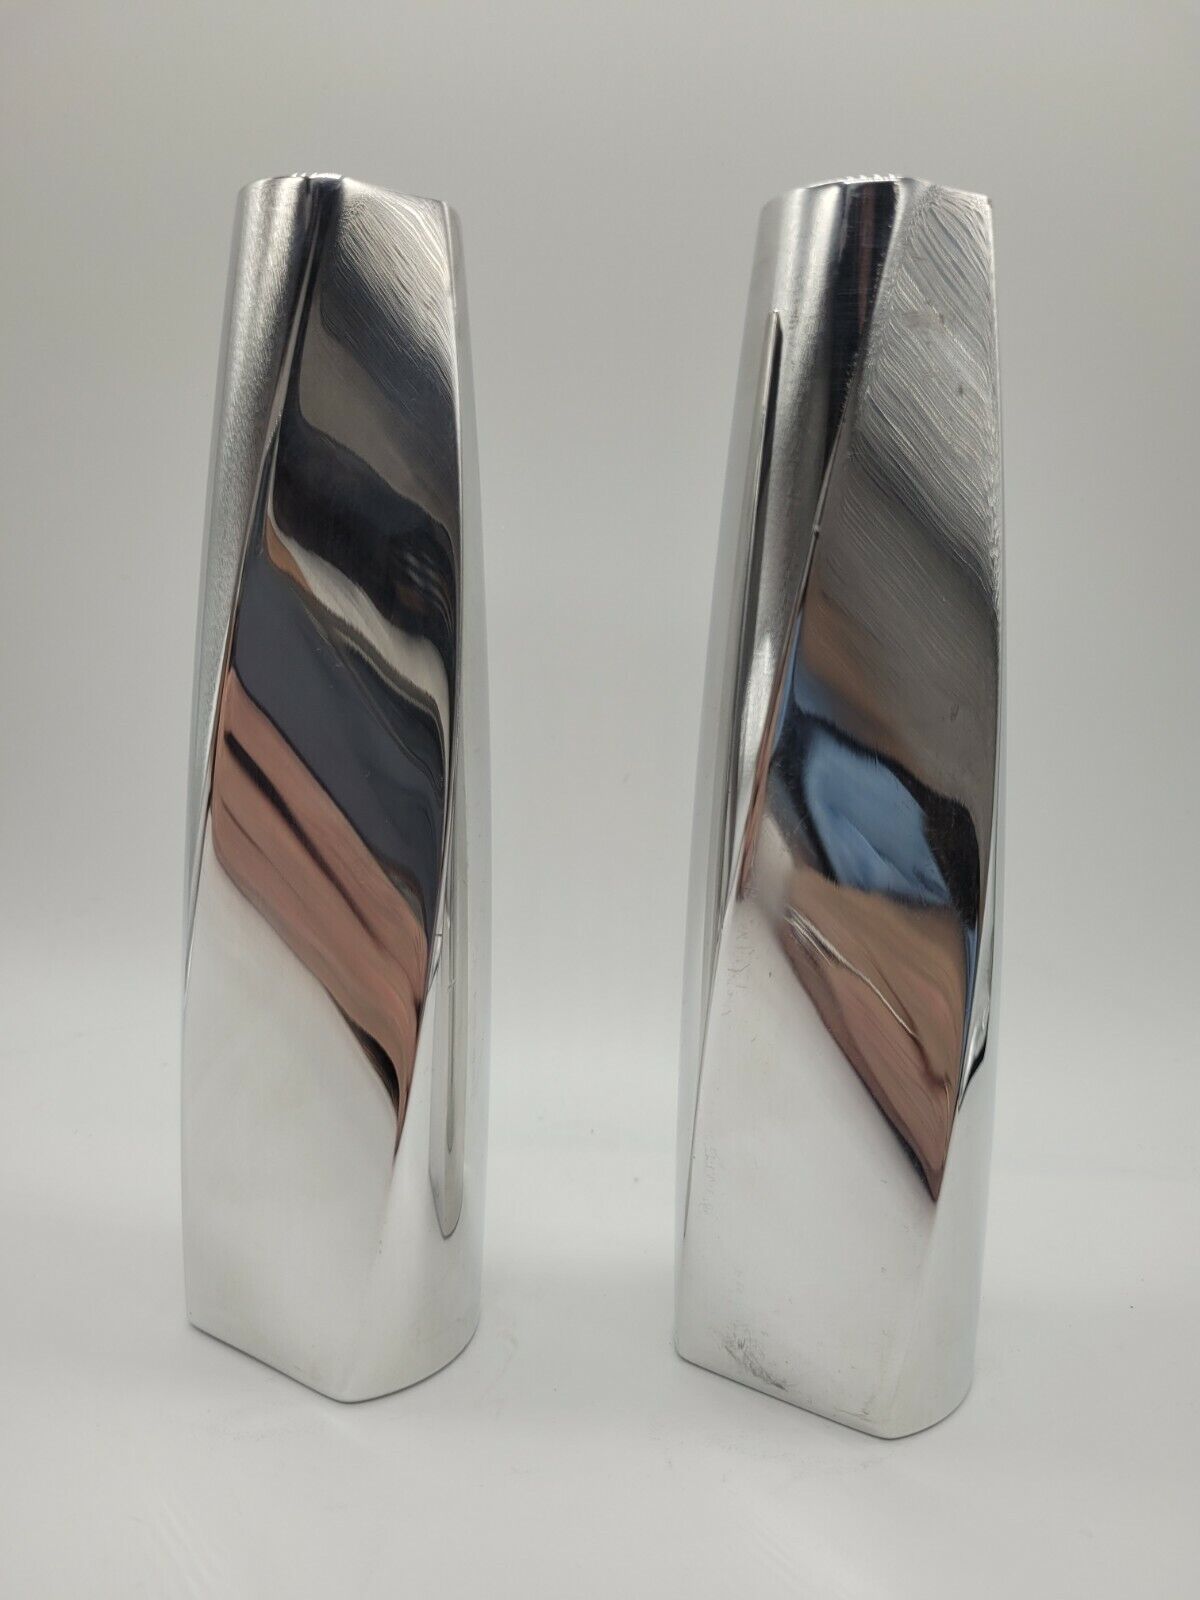 NAMBE Pair Twist Fred Bould 6236 Silver Candlesticks Holders 7” 2002 Pair Nambé NAMBE Twist Fred Bould 6236